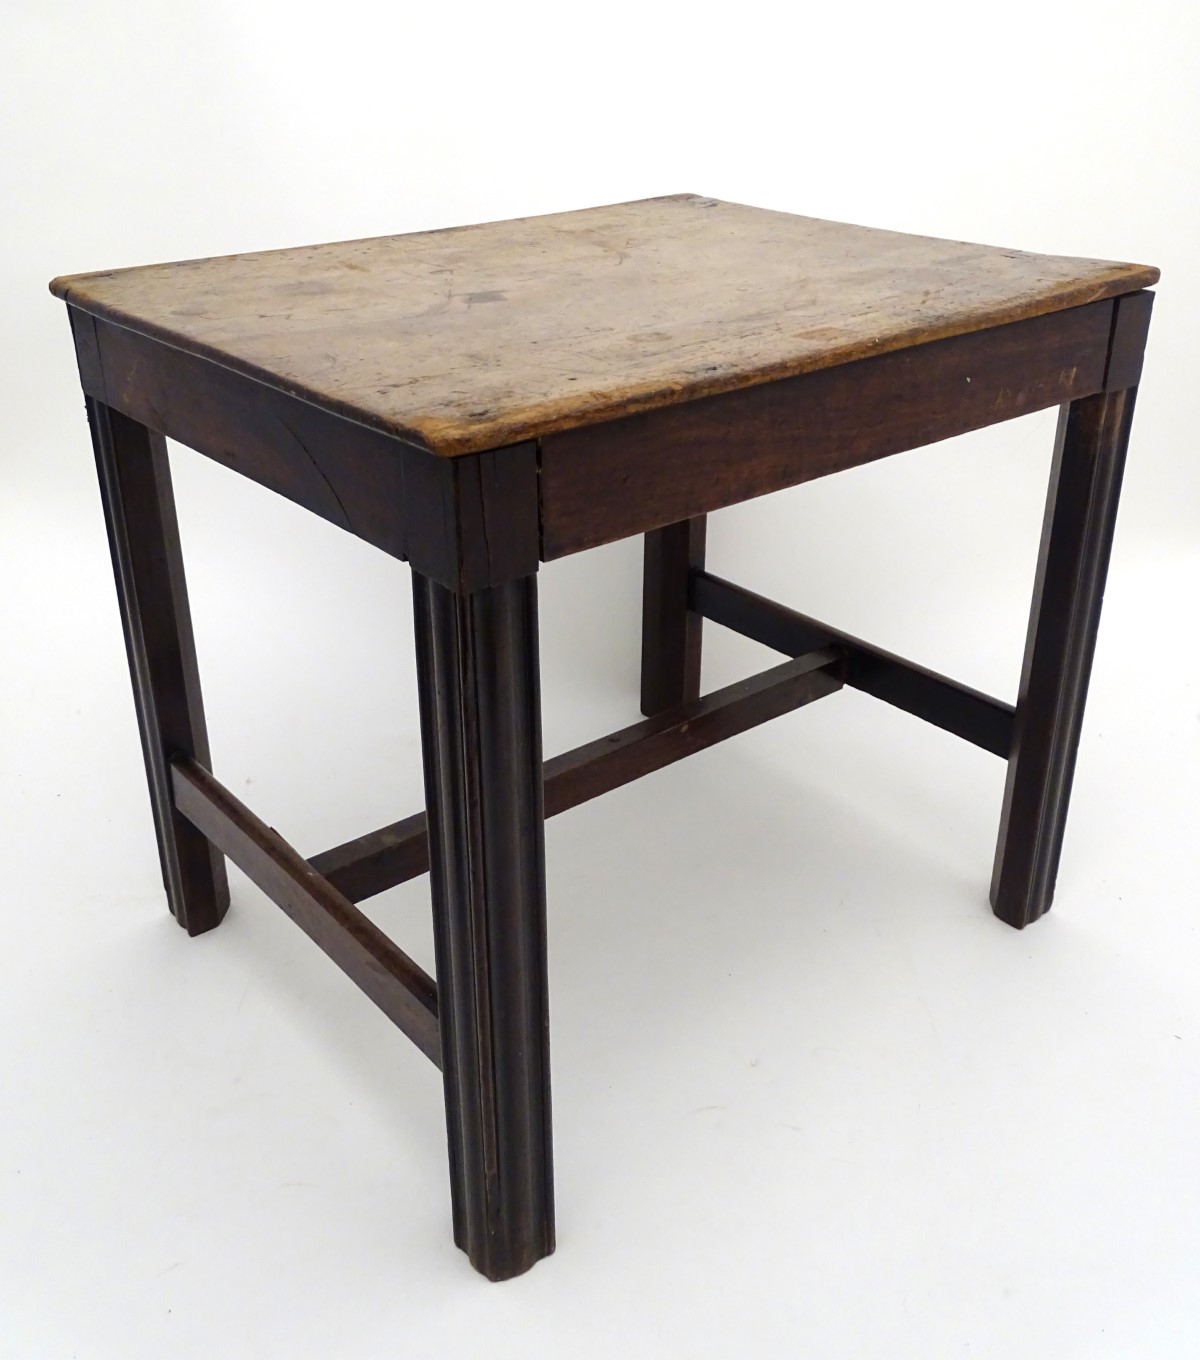 A late 18thC mahogany low table / stool with moulded legs and a chamfered frame, - Image 5 of 7